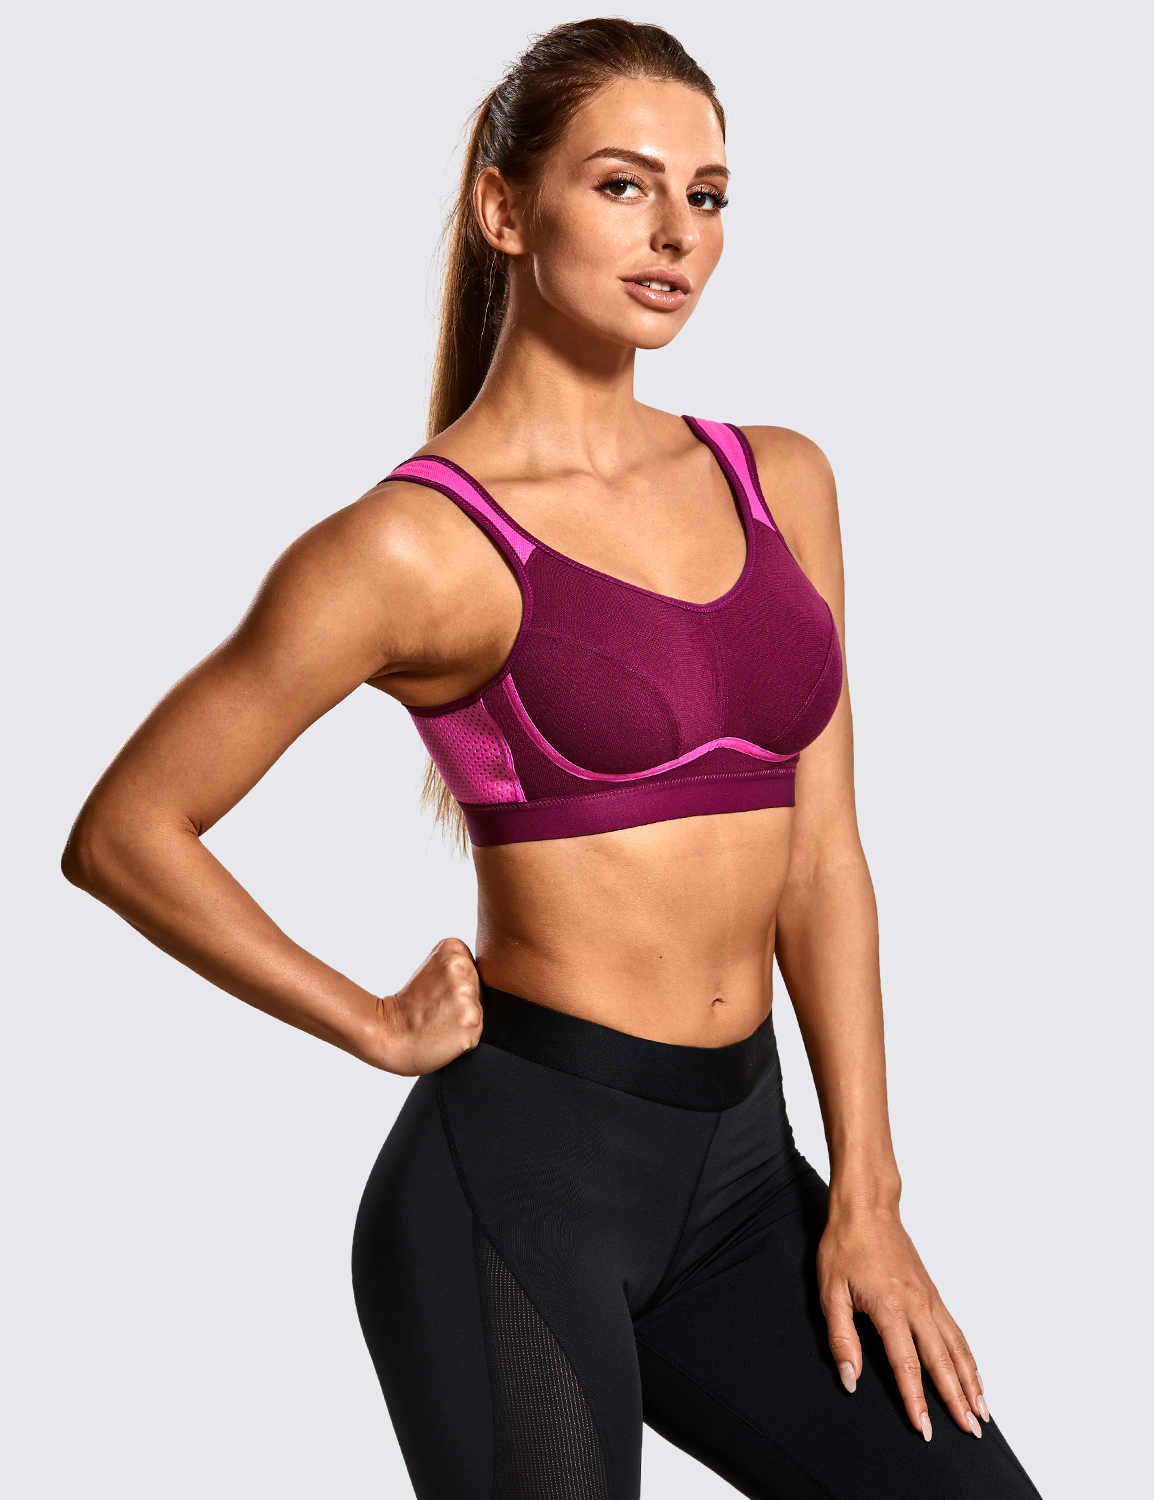 SYROKAN Sports Bra High Impact Support Bra Wirefree Bounce Control